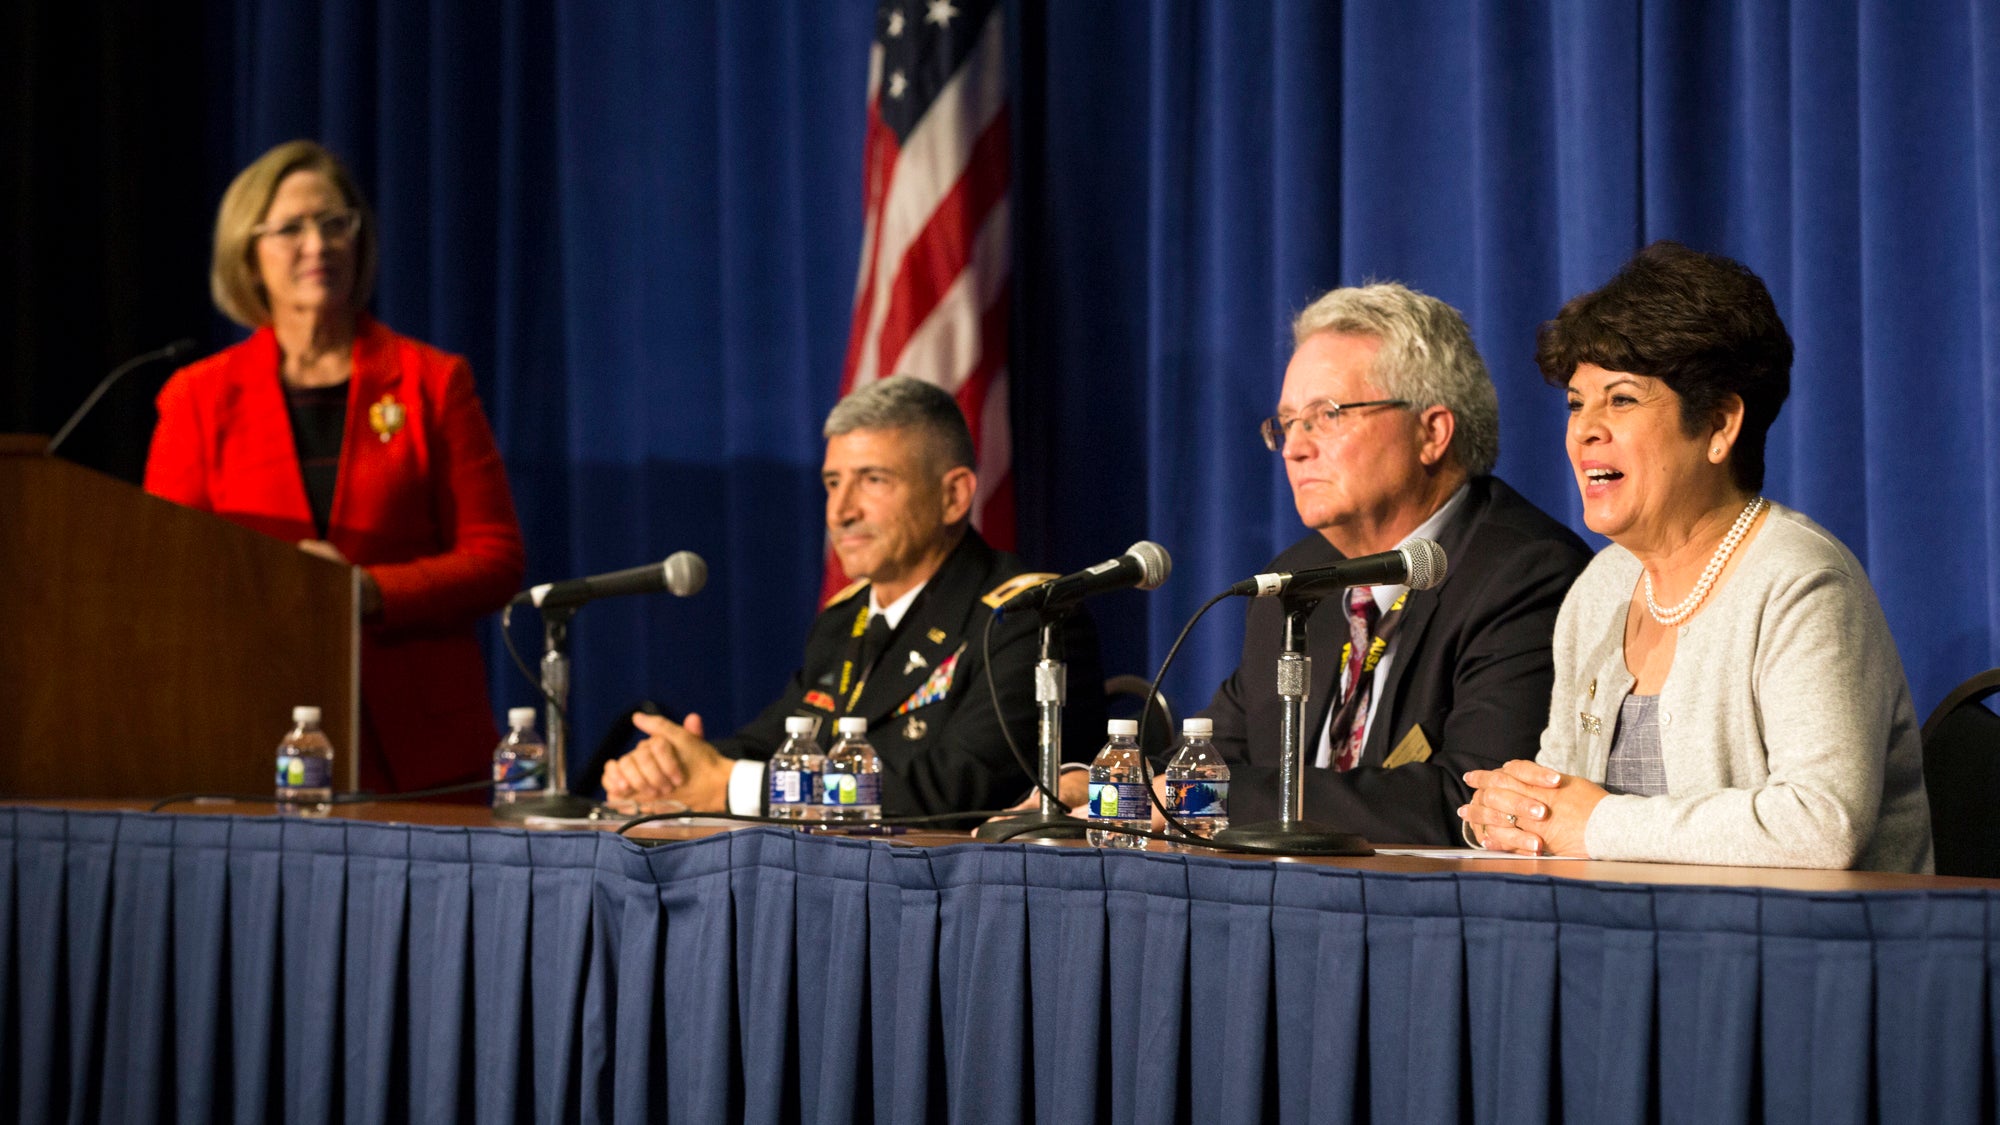 Patty Barron, Director of Family Readiness, speaks Oct. 14, 2019, during a family forum at the 2019 AUSA Annual Meeting and Exposition. Other panelists include retired Lt. Gen. Patricia Horoho, Col. Steve Lewis and Robert McCartney.